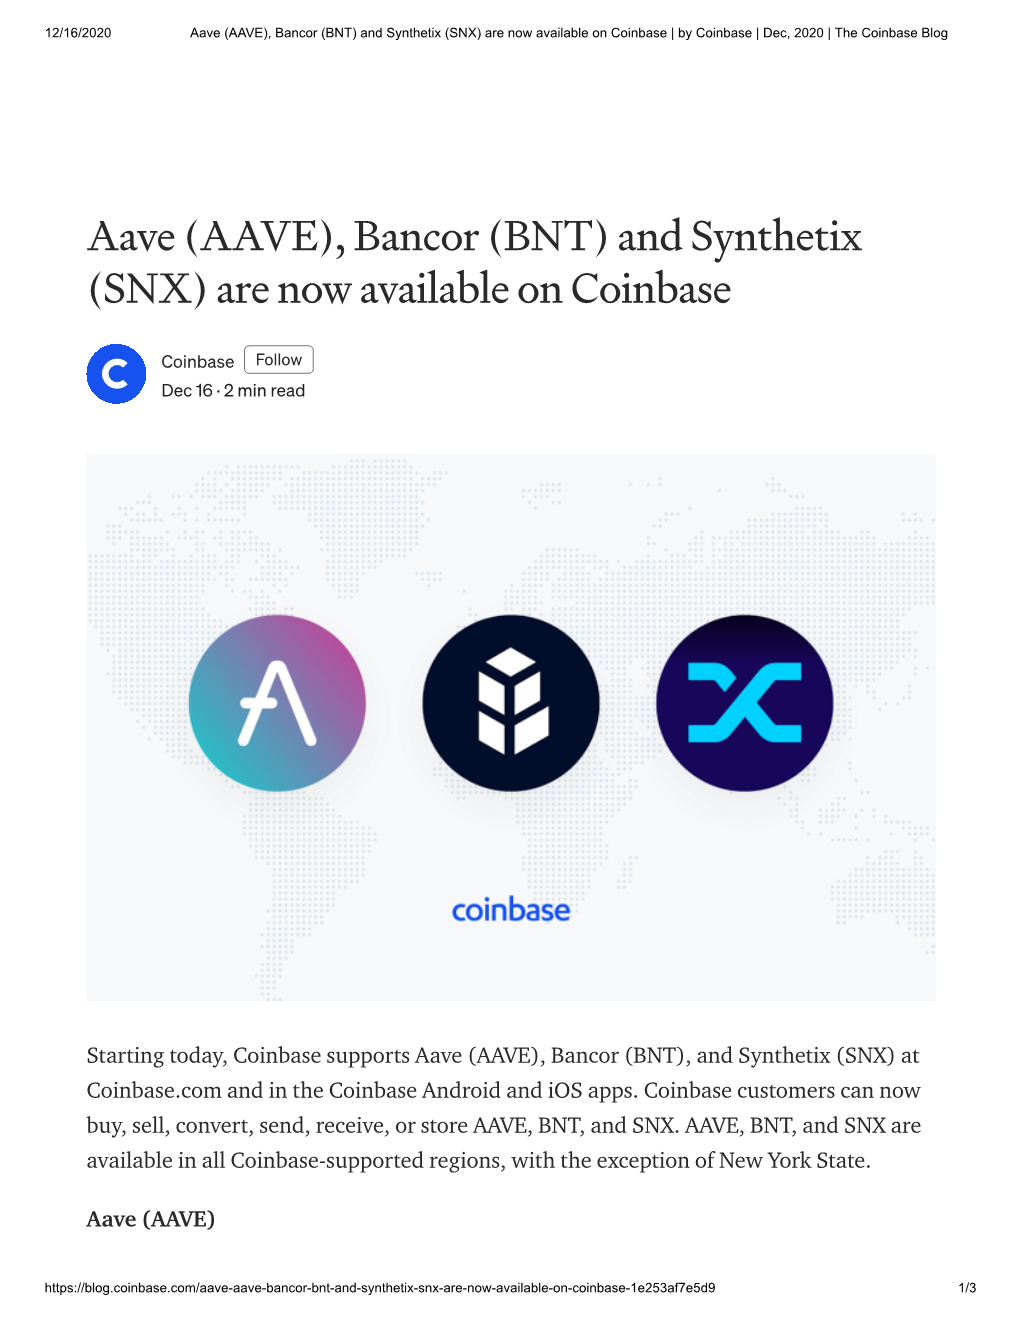 (AAVE), Bancor (BNT) and Synthetix (SNX) Are Now Available on Coinbase | by Coinbase | Dec, 2020 | the Coinbase Blog